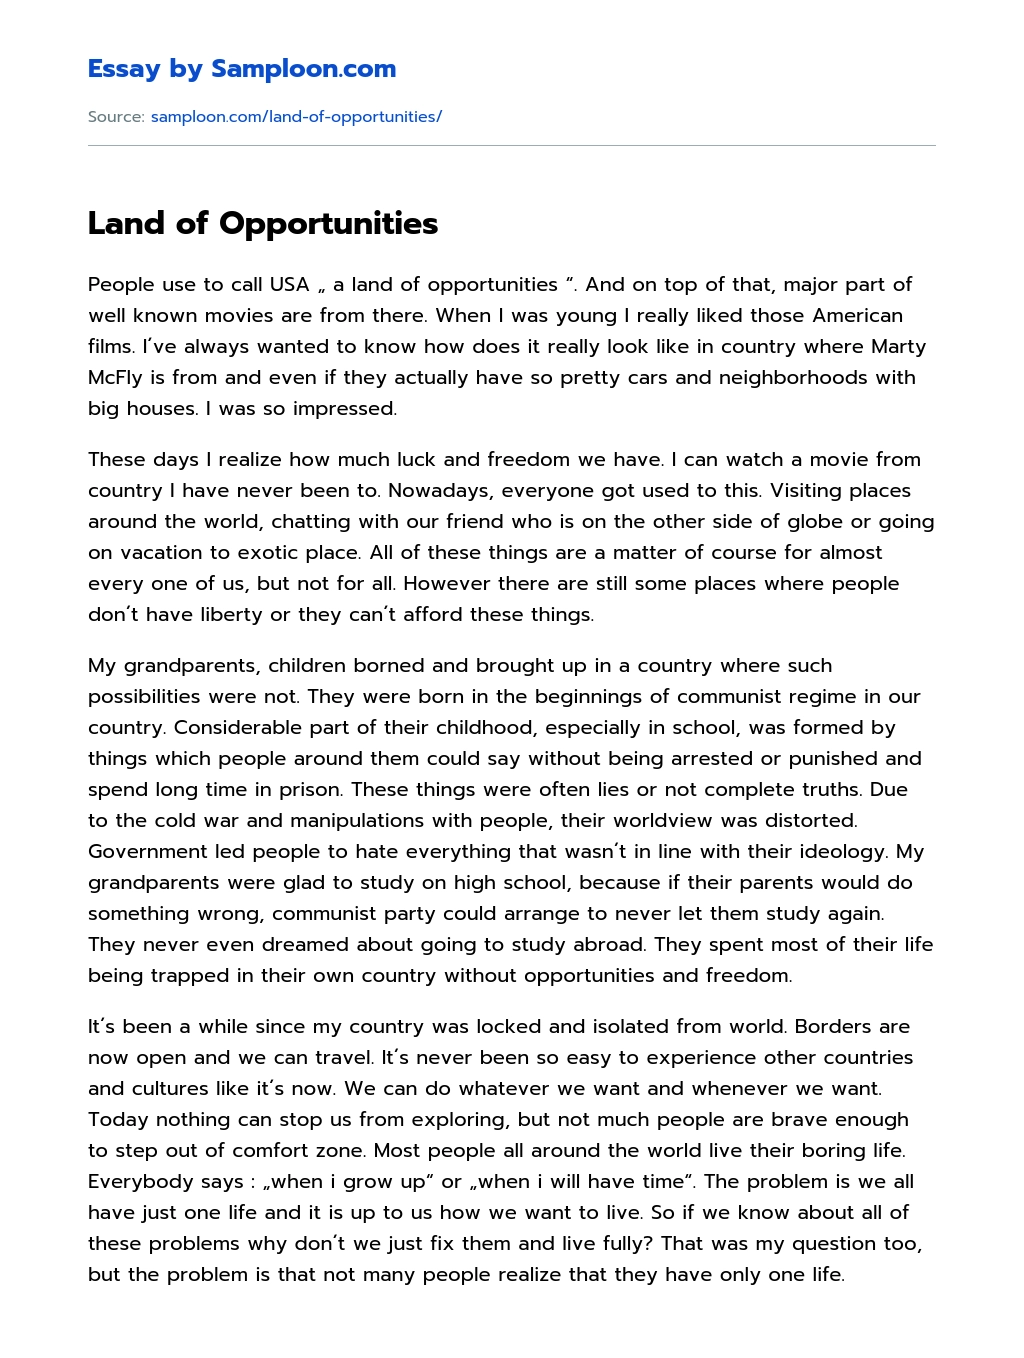 Land of Opportunities essay